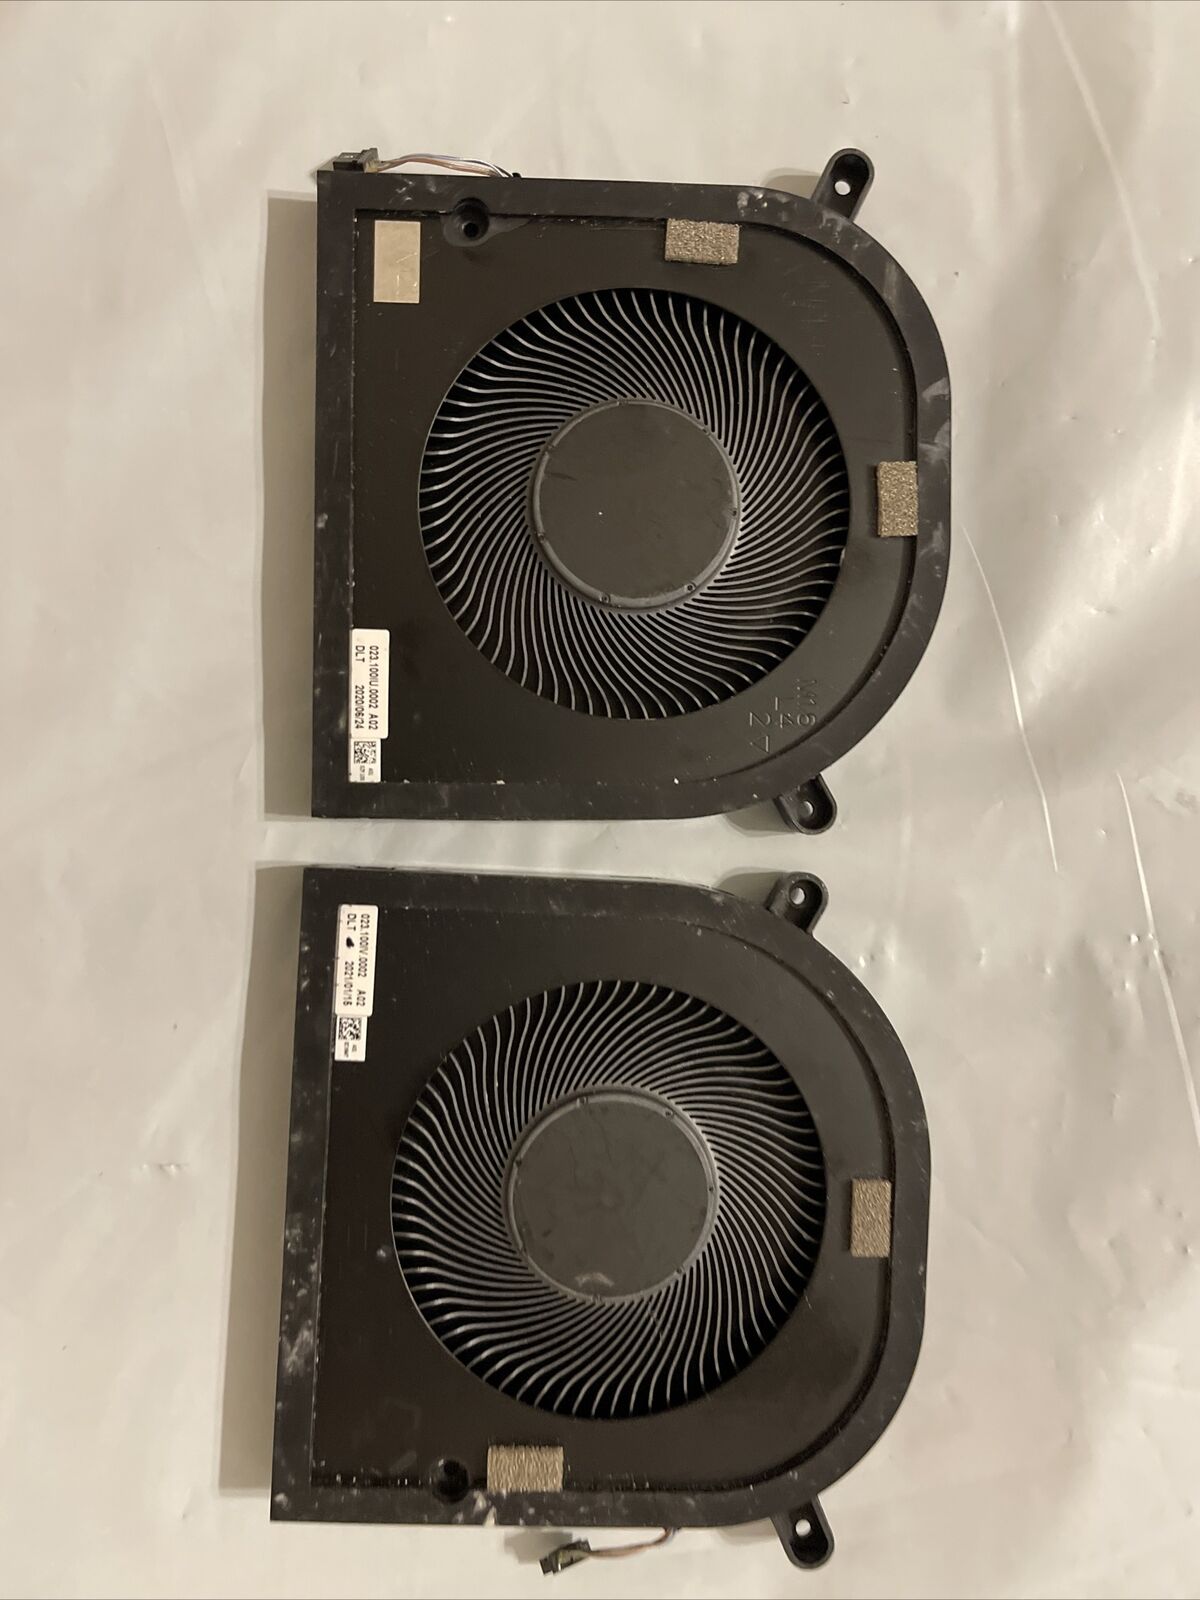 Genui DELL XPS 17 9700 9710 9720 Laptop CPU GPU Cooling Fans DC5V 0MXF81 0P2FY9